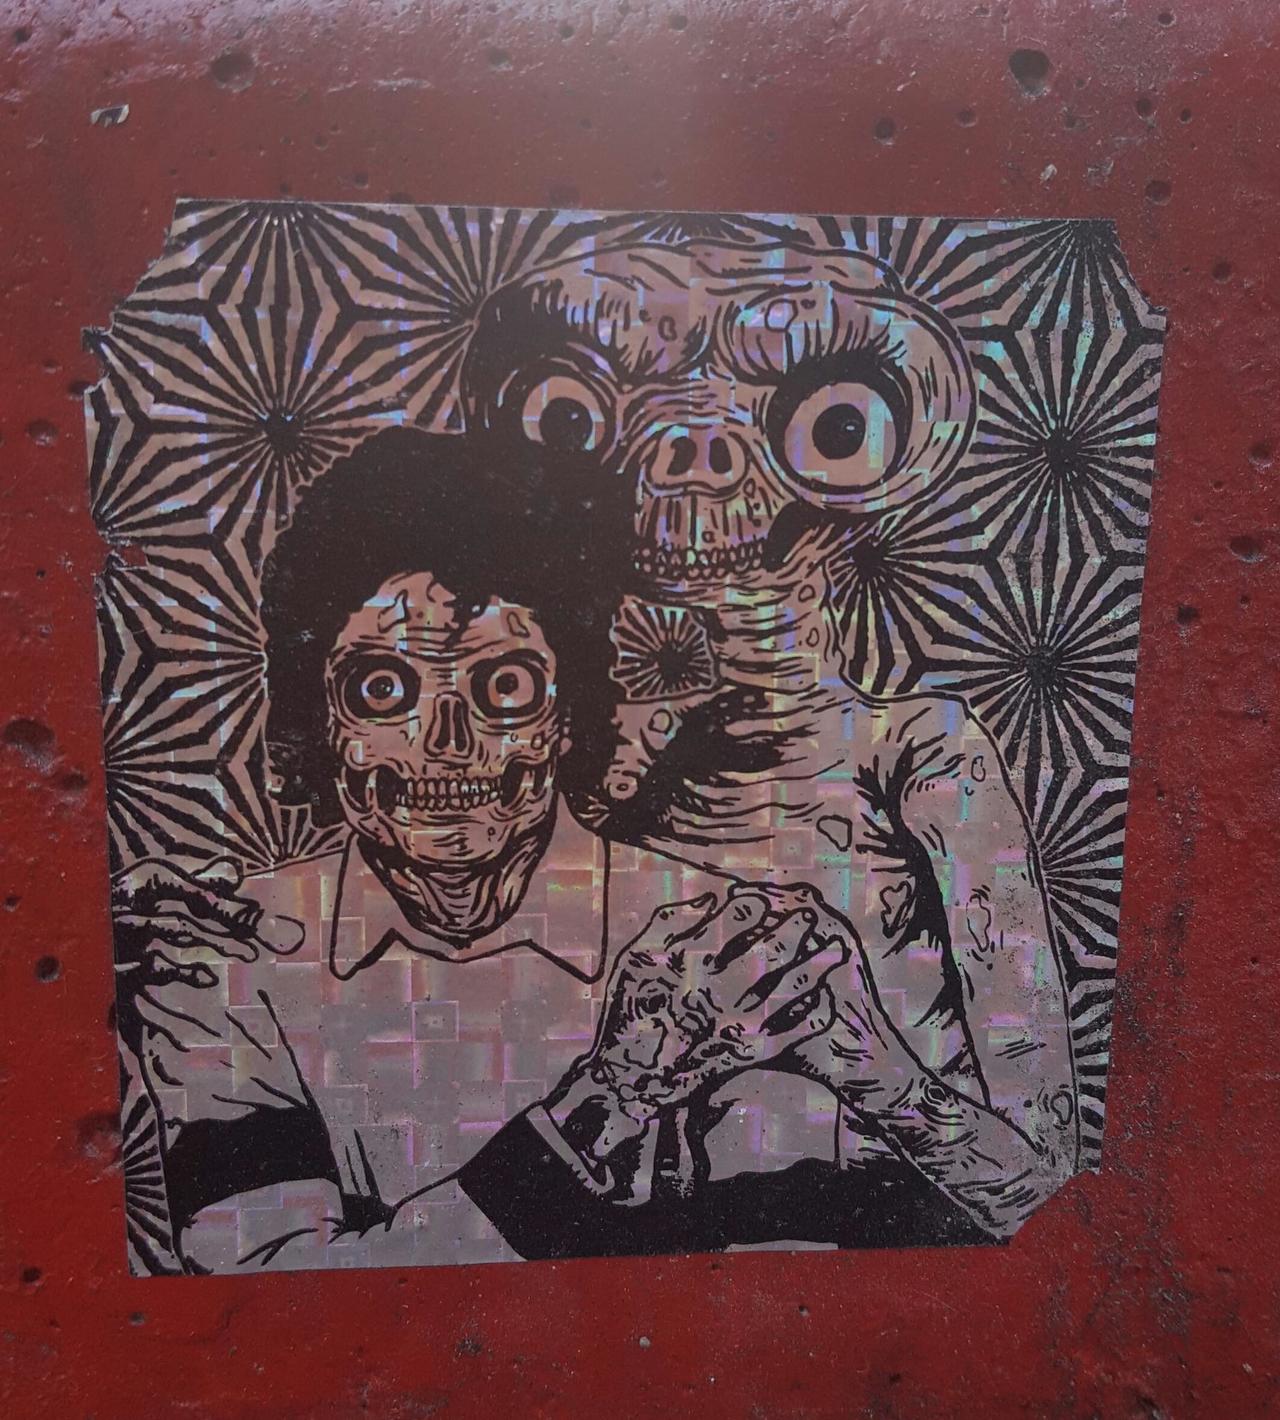 Michael Jackson and ET. Not sure of the artist, but it looks like #Skam #stickers #graffiti #streetart #SanFrancisco http://t.co/gdYcHVxlH3